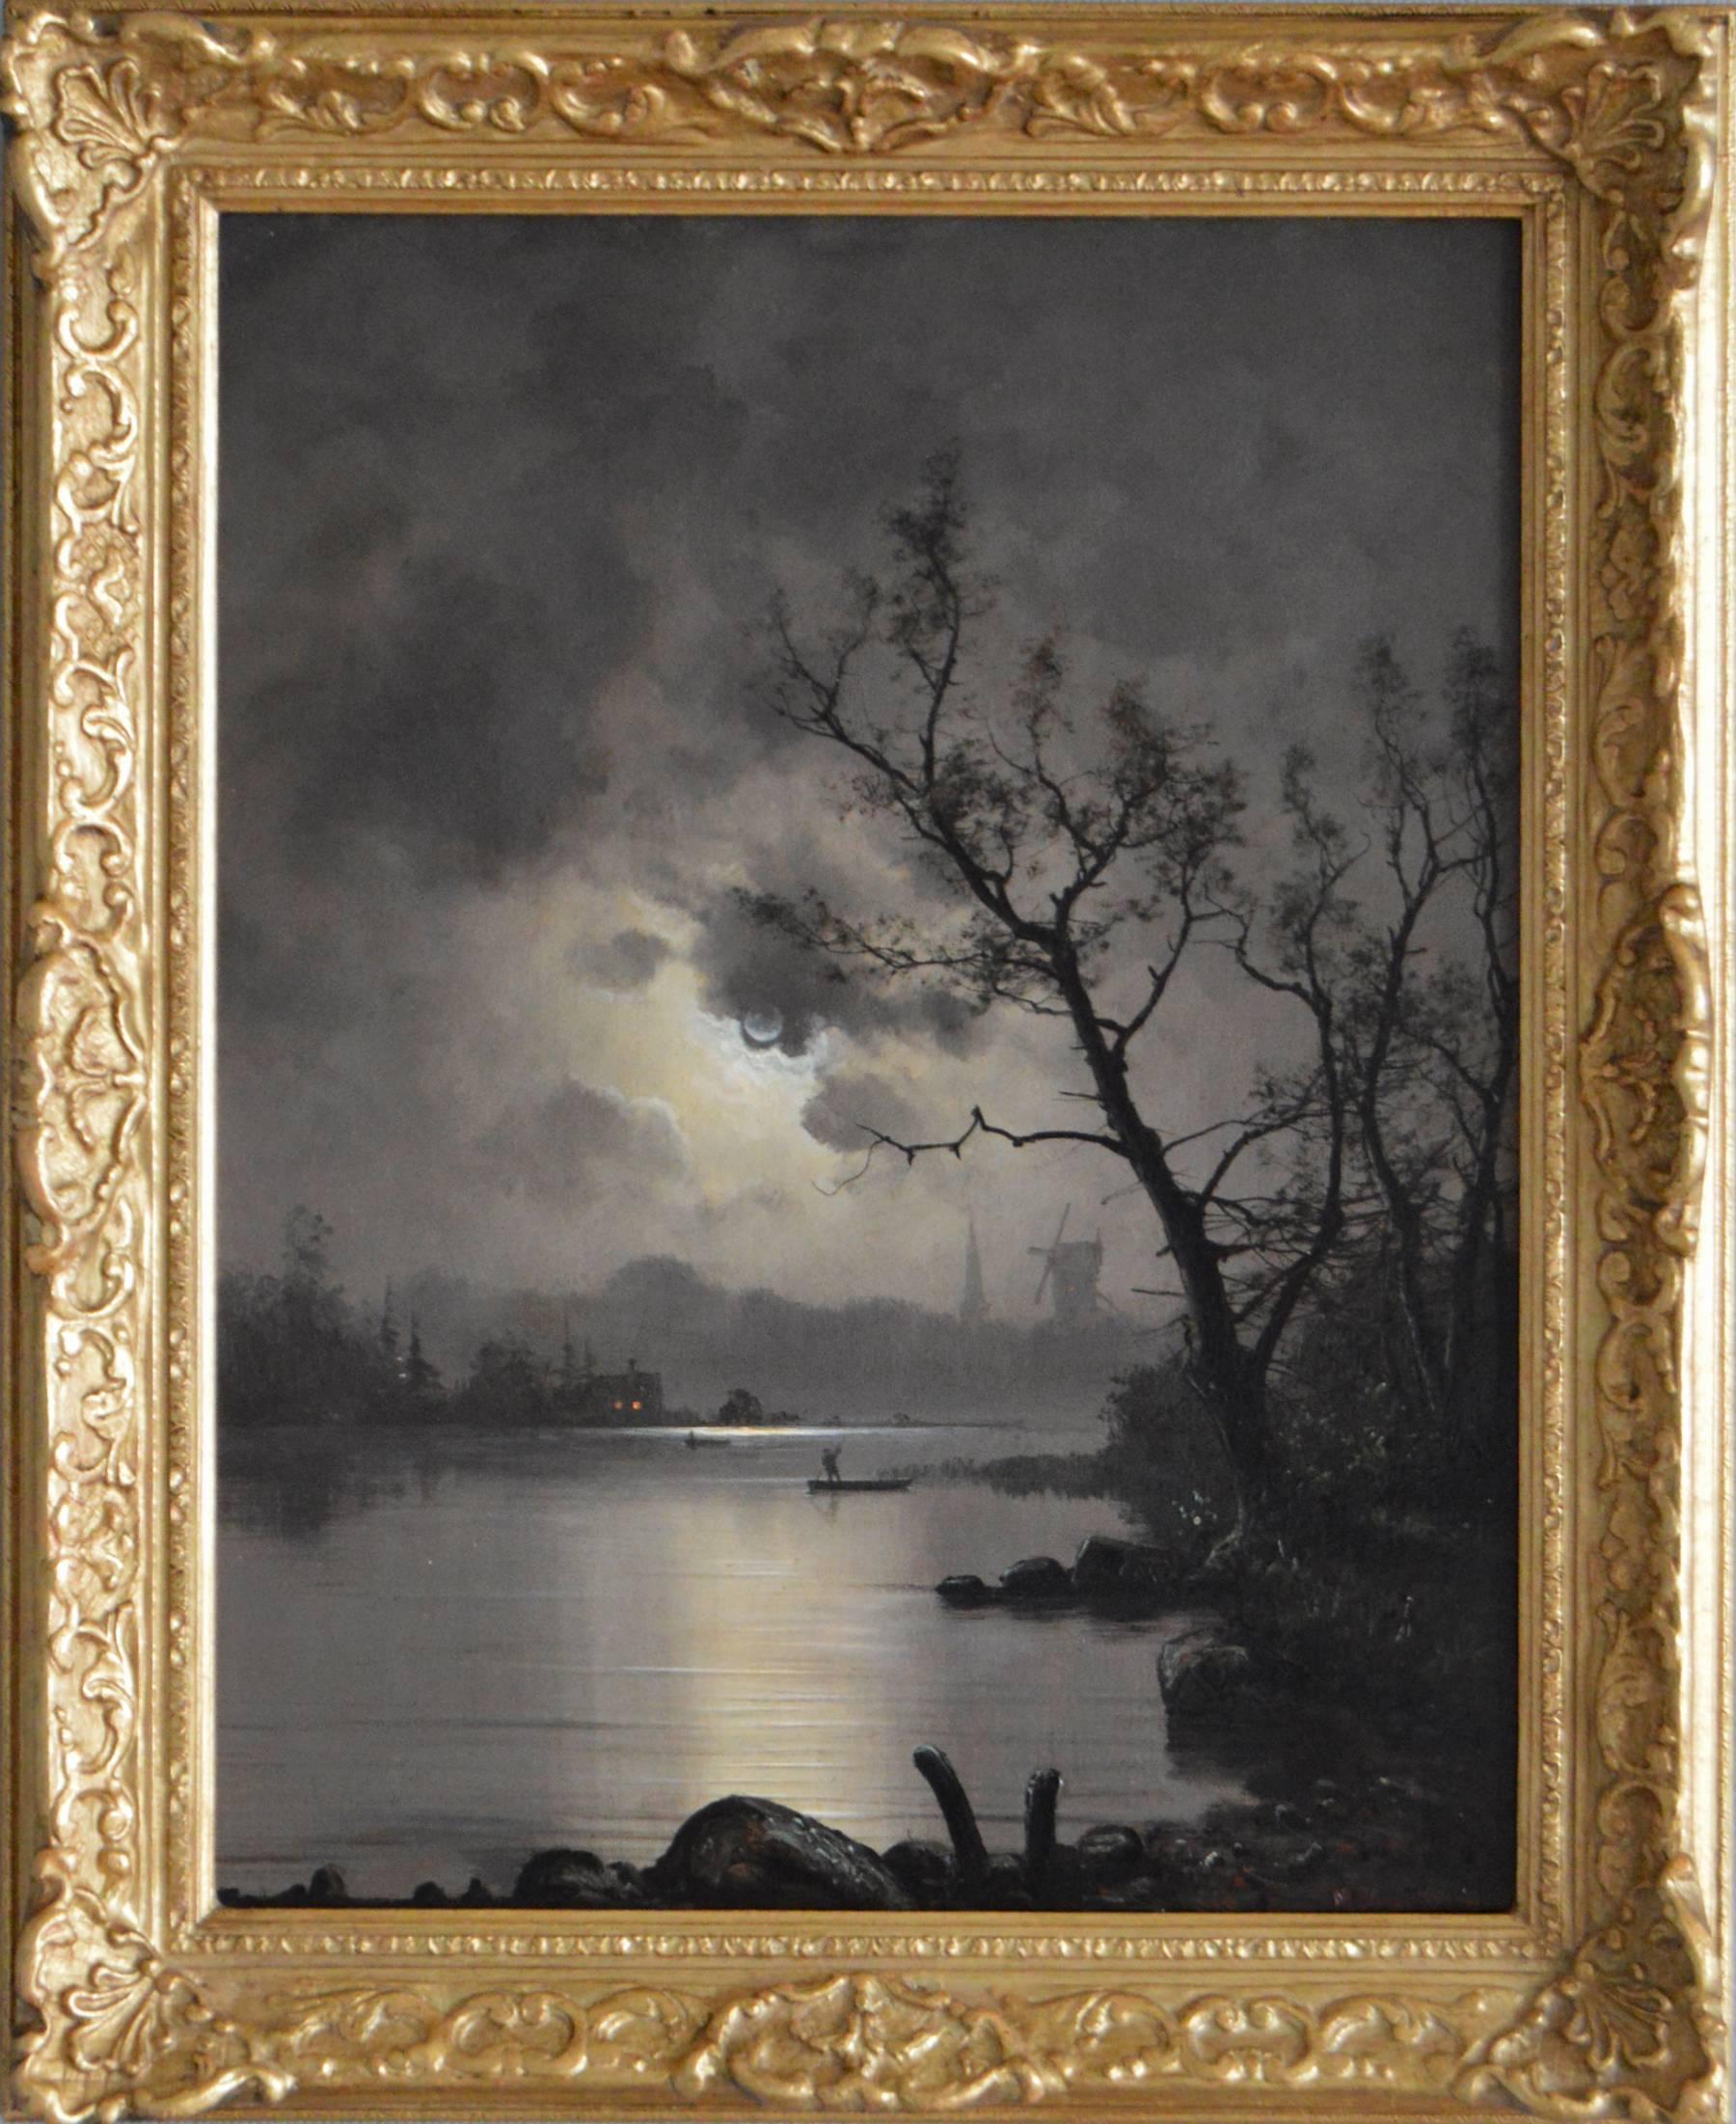 Nils Hans Christiansen Landscape Painting - Fishing by Moonlight, oil on canvas